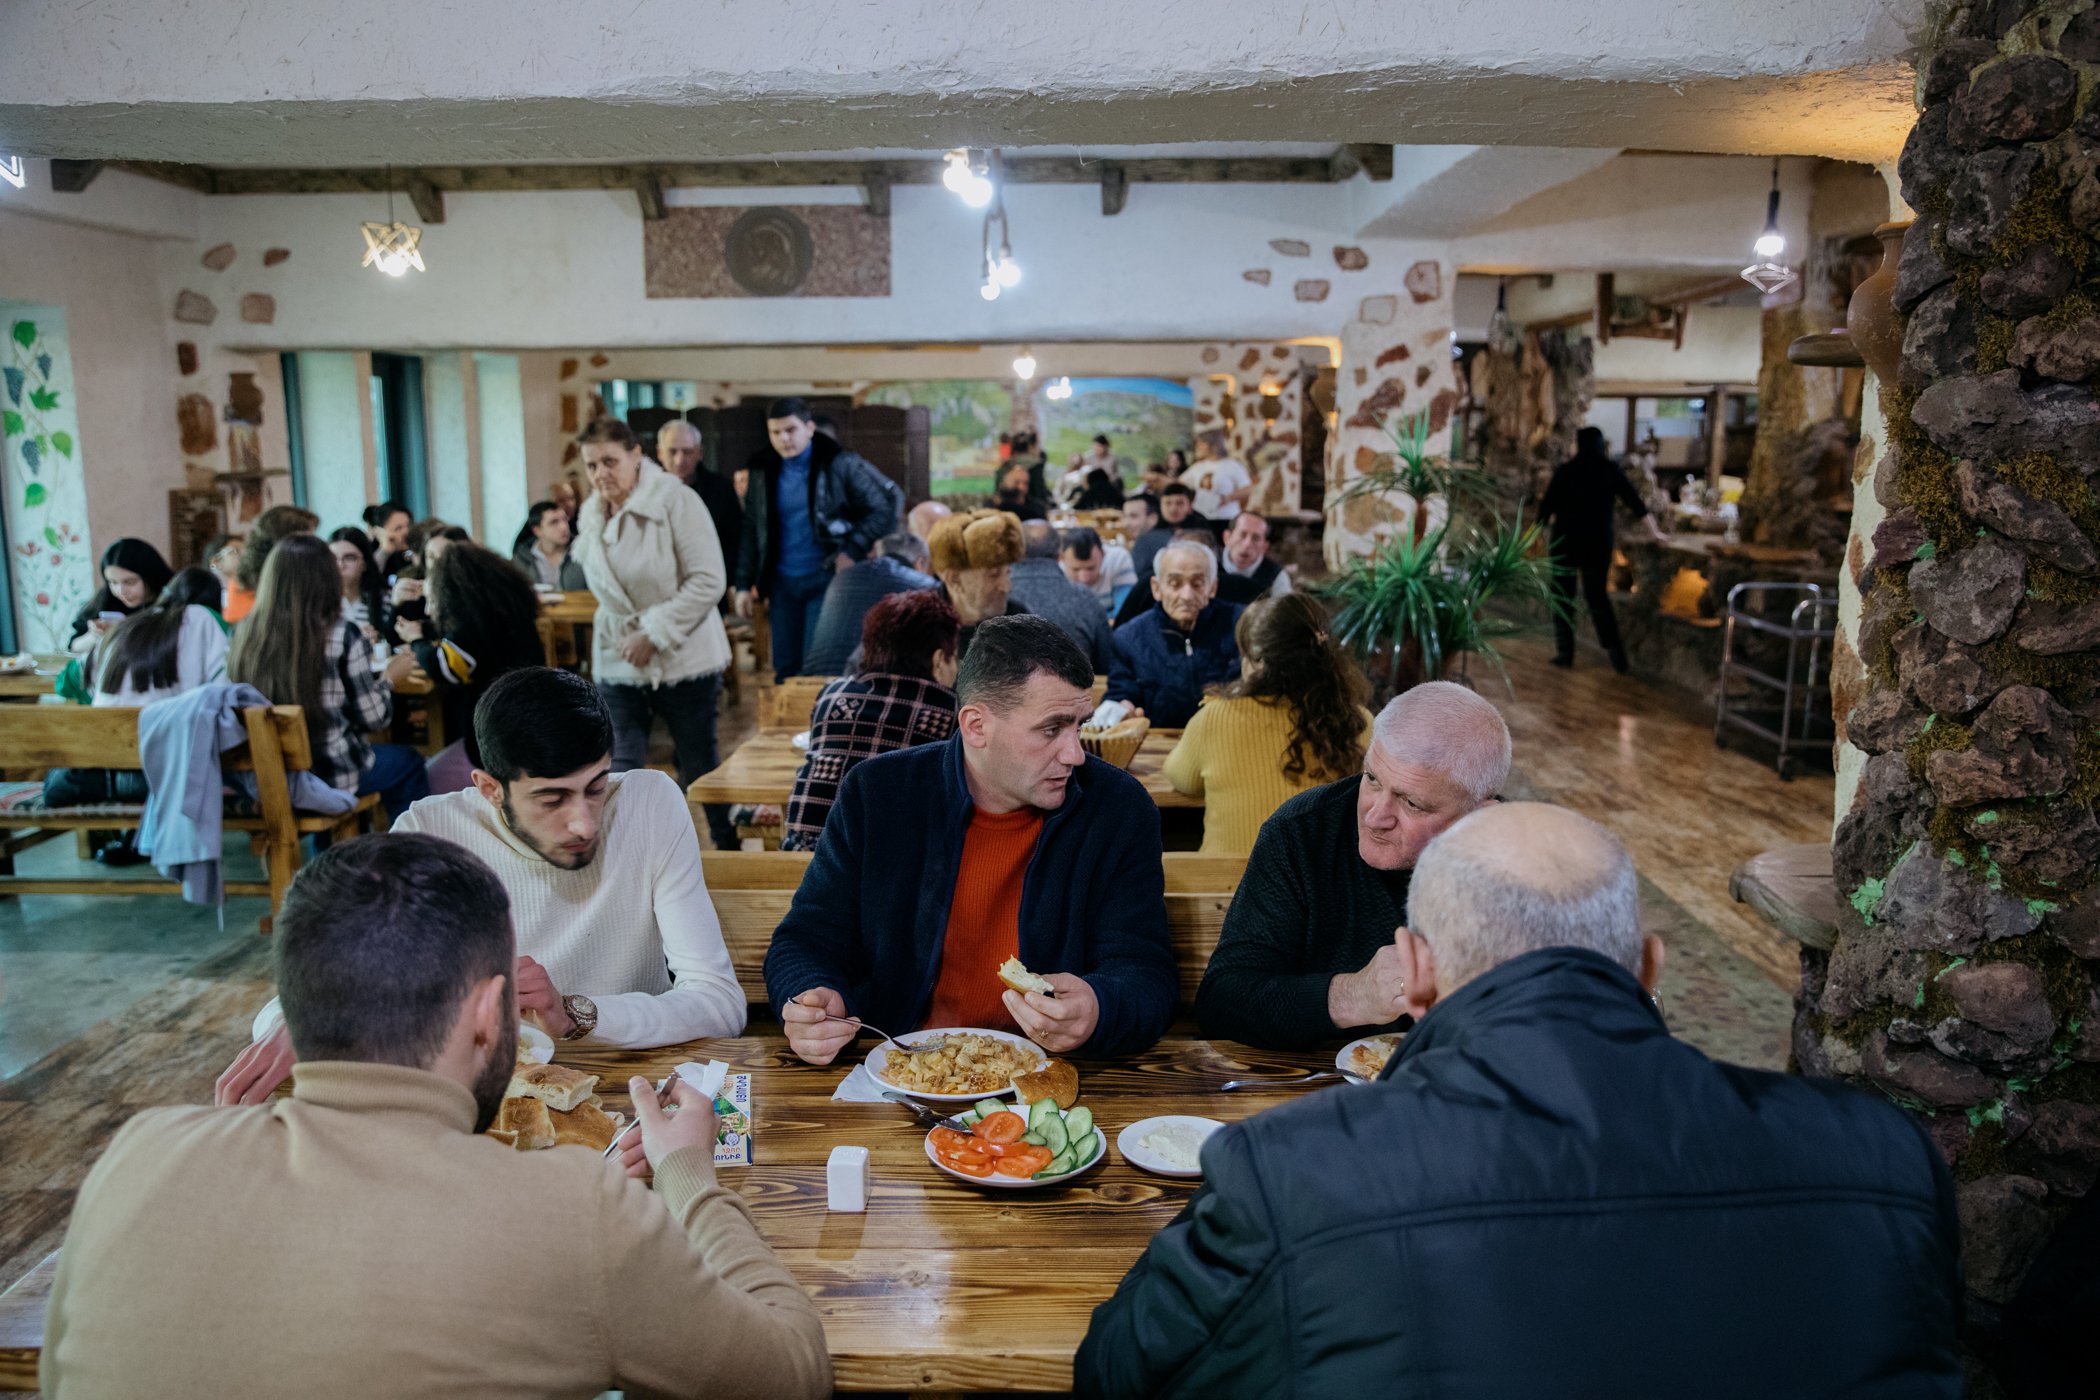  Residents of Nagorno-Karabakh eat dinner at the Hotel Goris. The Armenian government is covering the cost of accommodation for those who are unable to return home. The hotel is currently hosting around 150 people. 